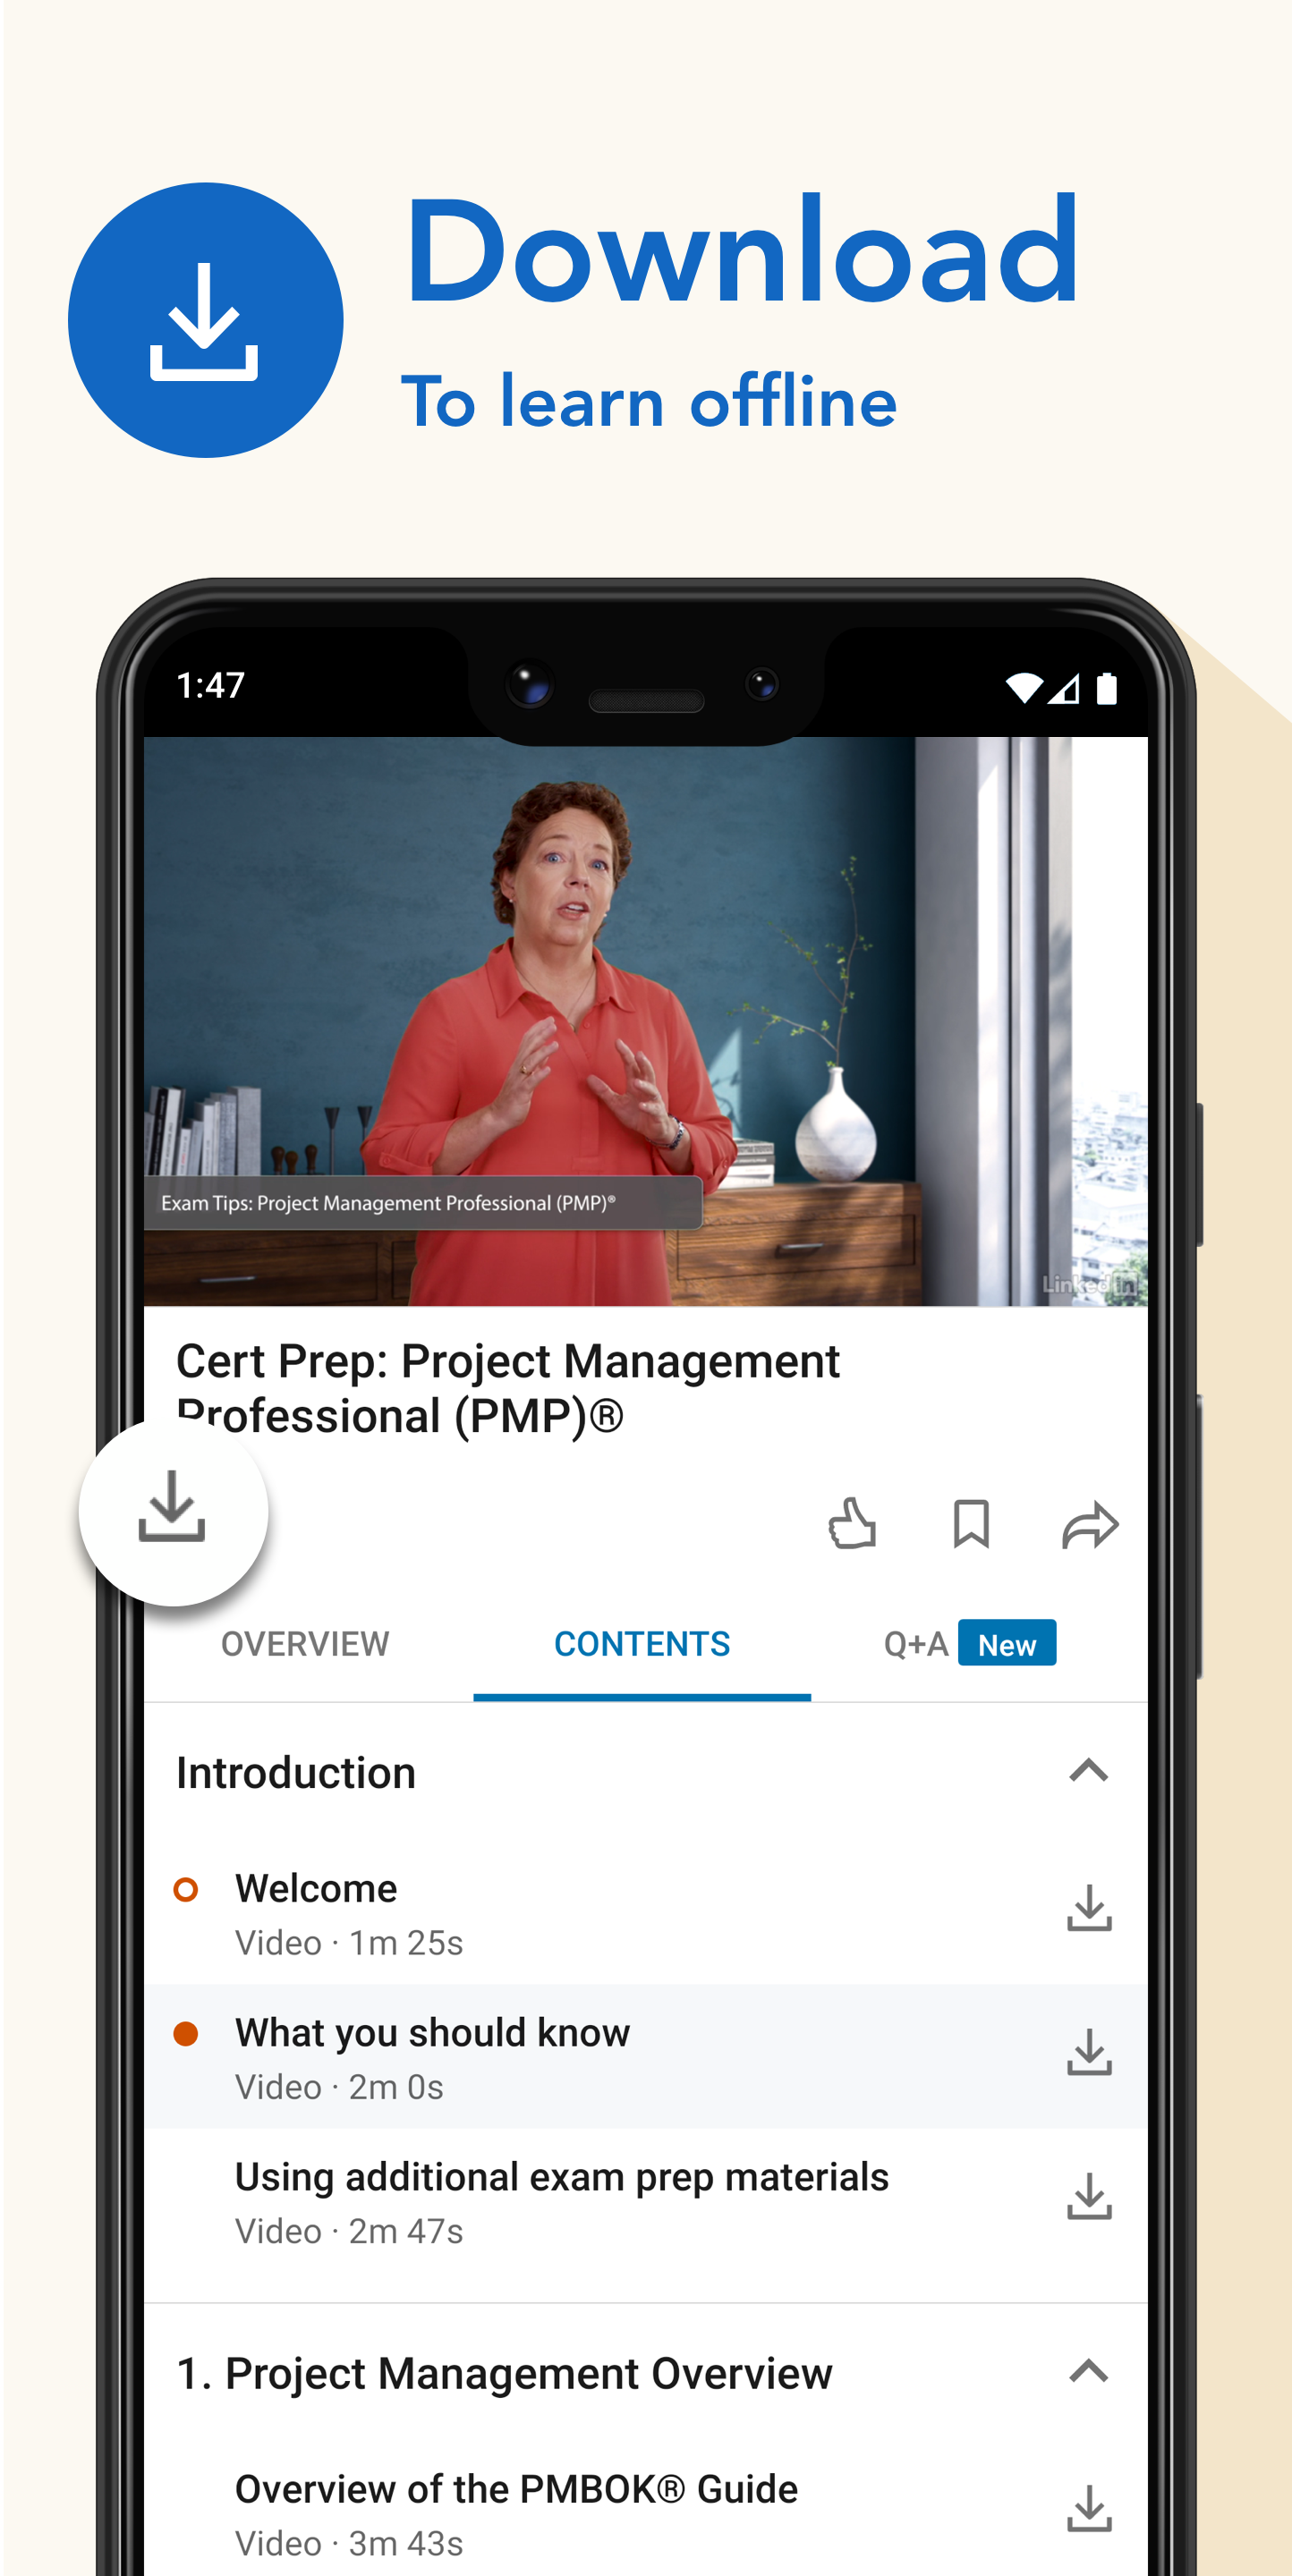 Android application LinkedIn Learning: Online Courses to Learn Skills screenshort